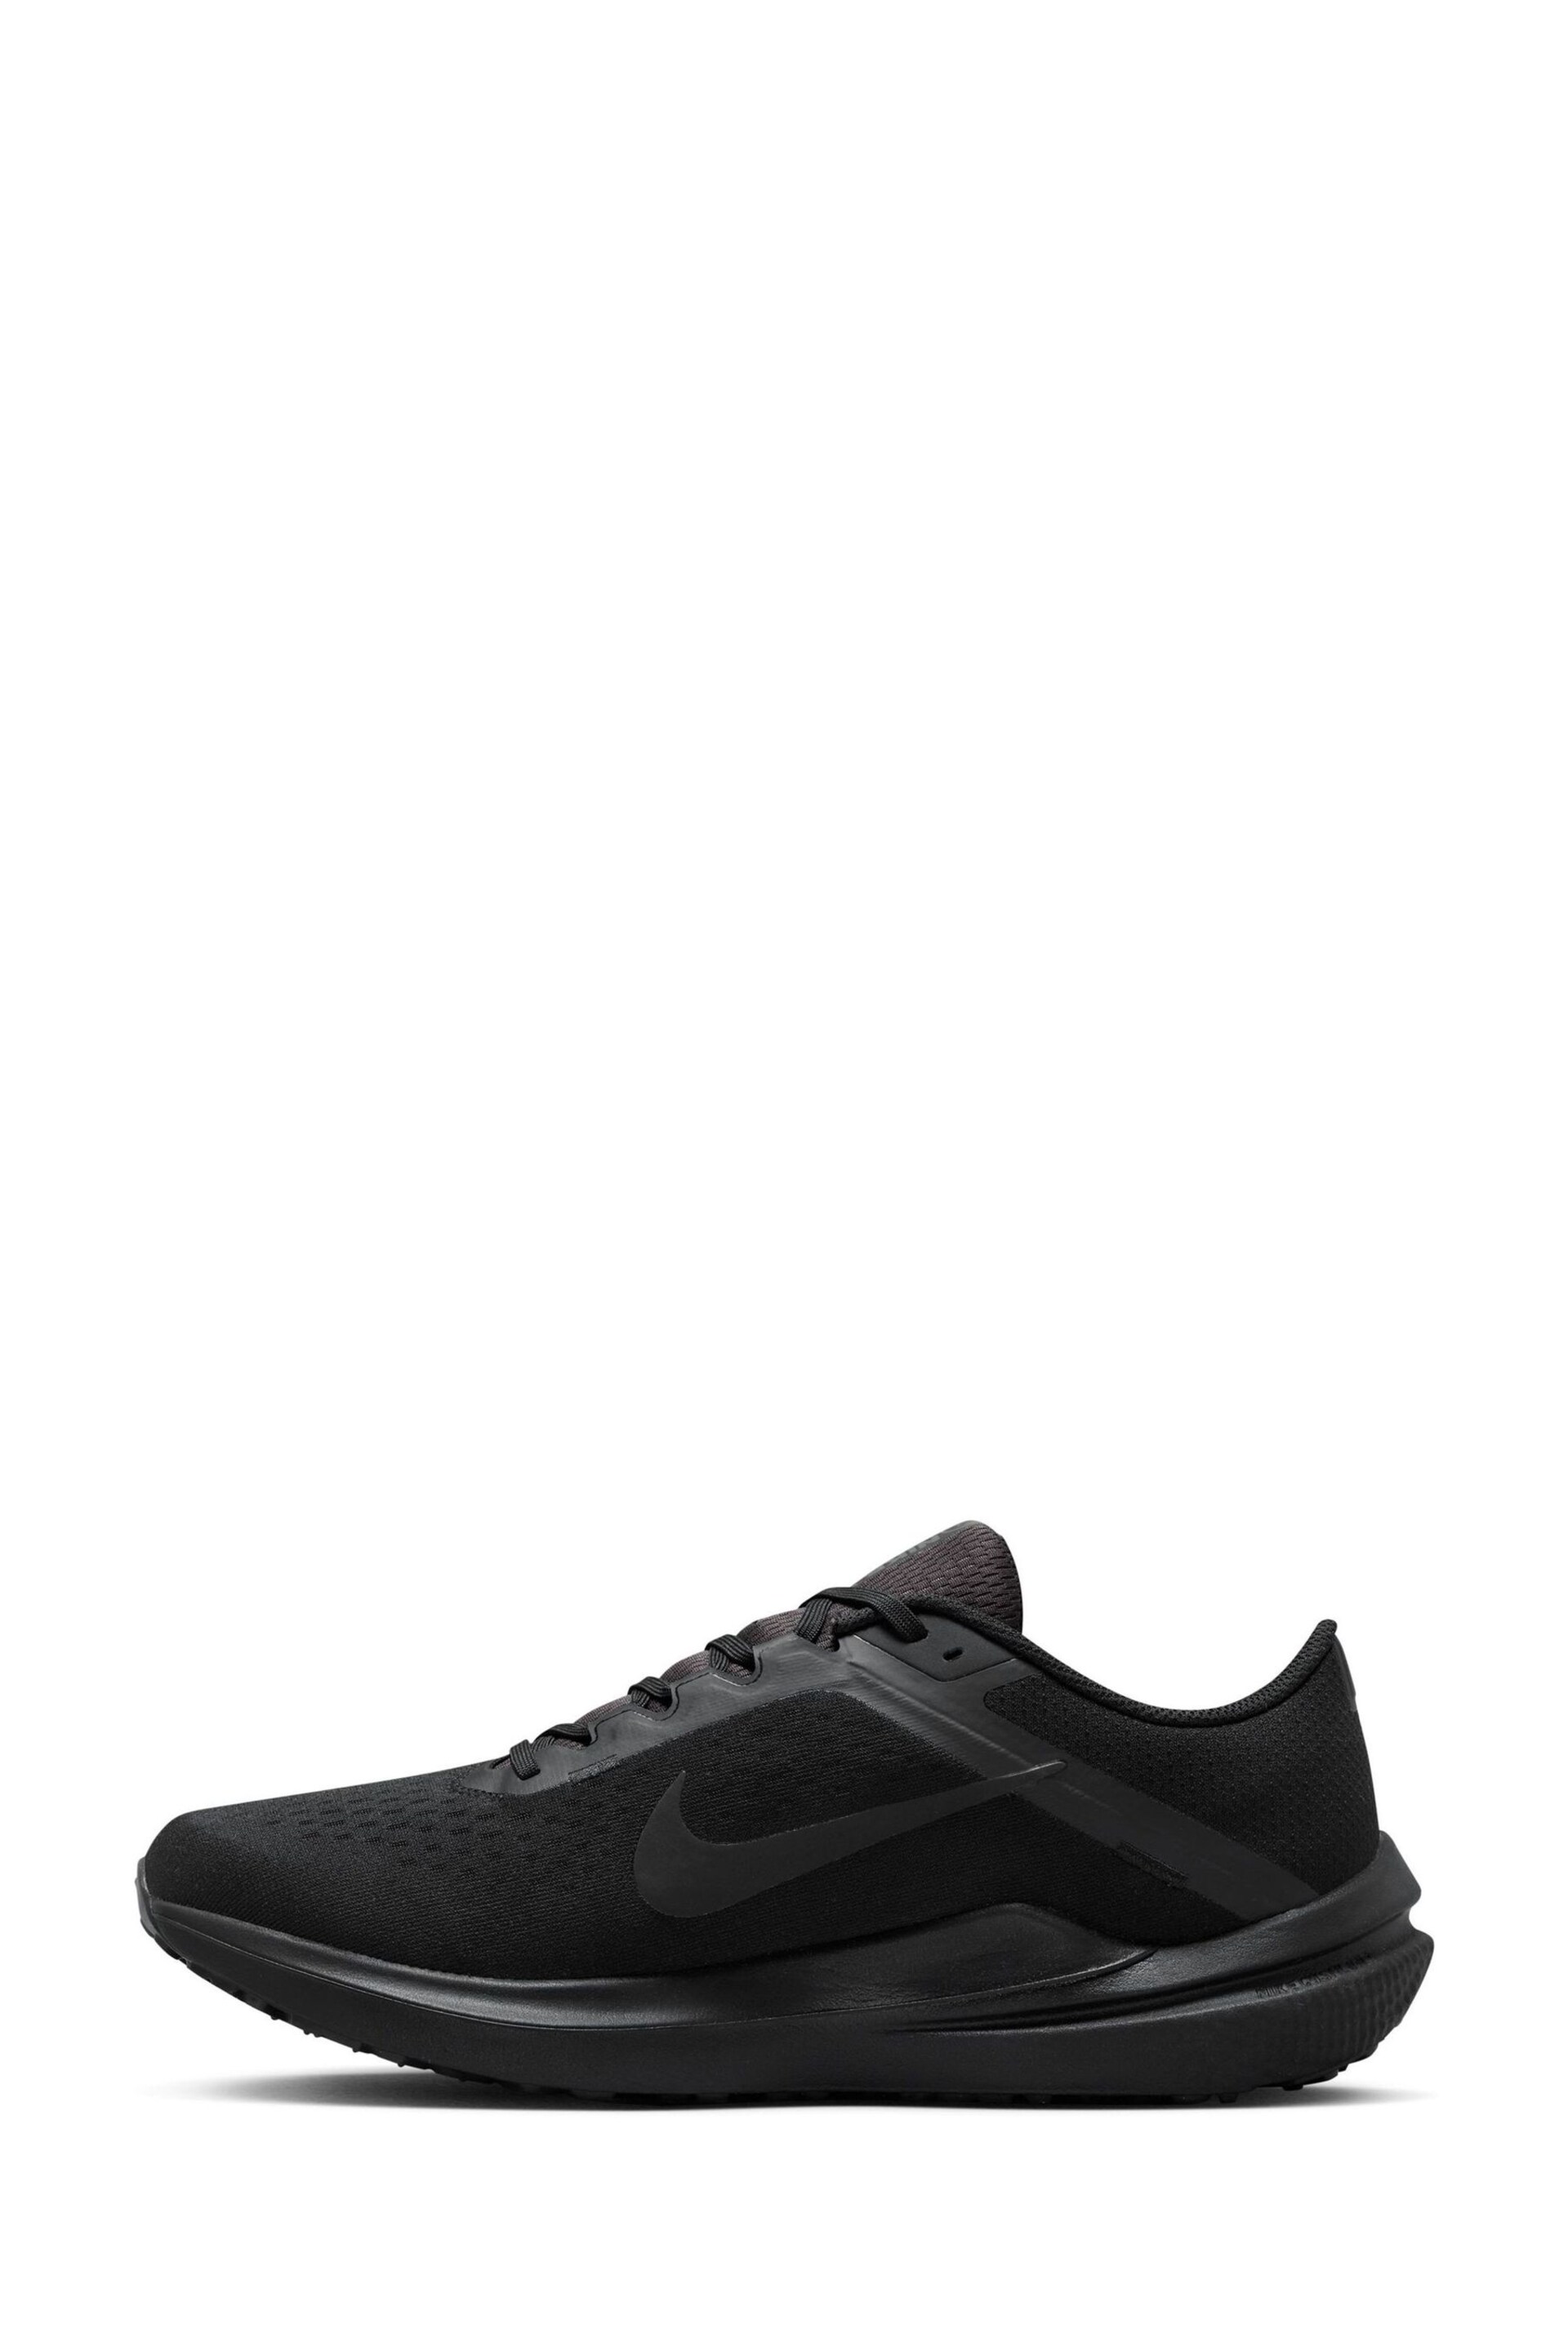 Nike Black Air Winflo 10 Running Trainers - Image 5 of 11